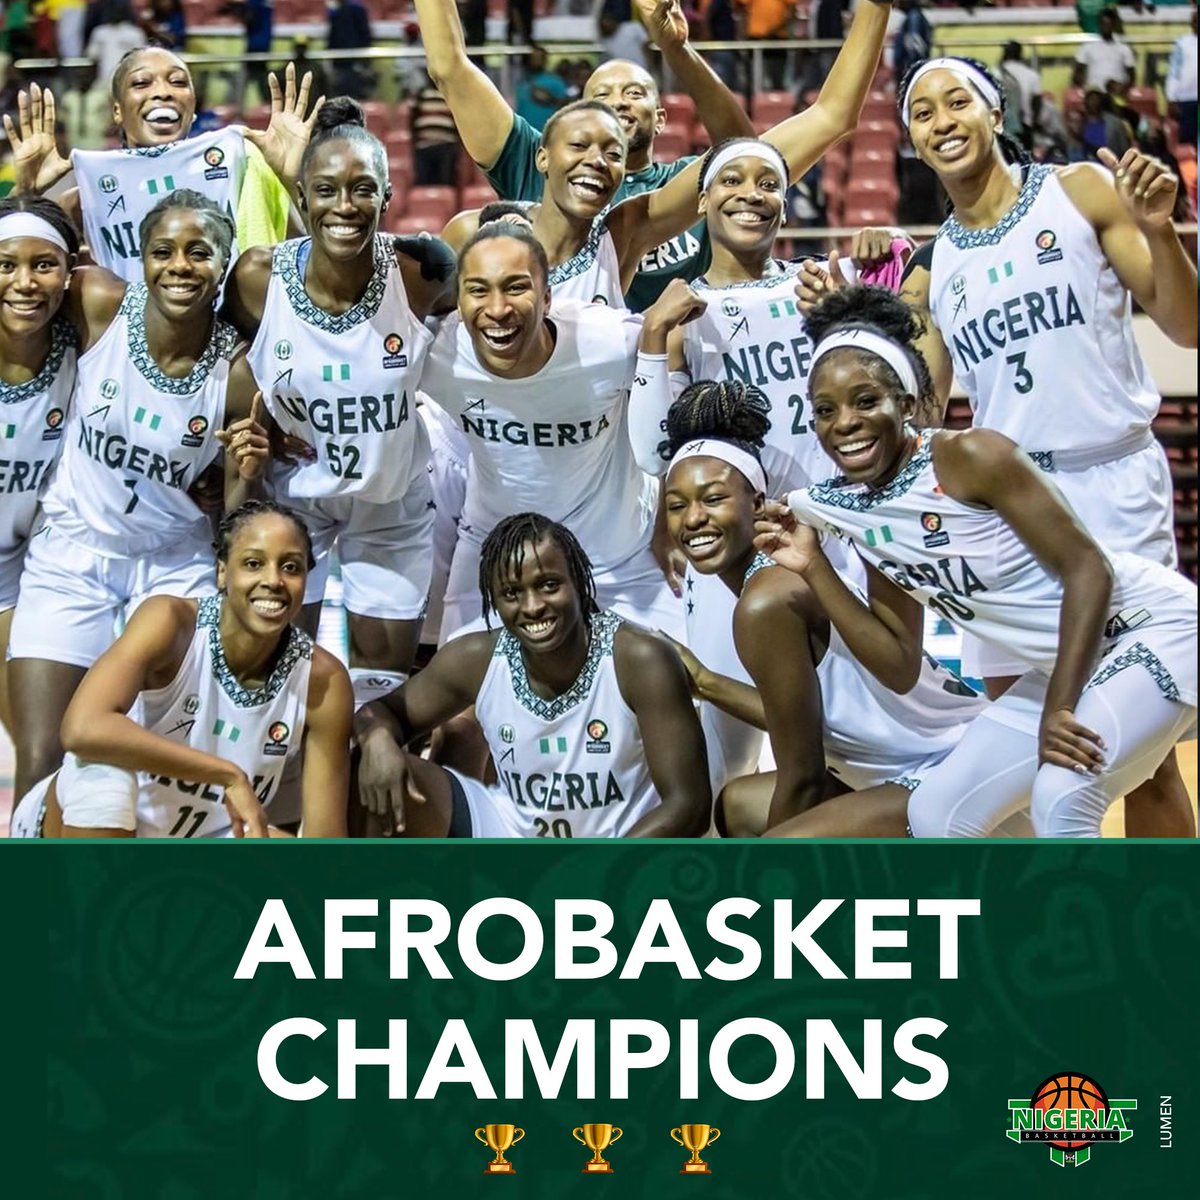 THE QUEENS OF AFRICA. 

THREE-PEAT FOR D’TIGRESS! 

AfroBasket champs again! Congrats to our ladies!🏆